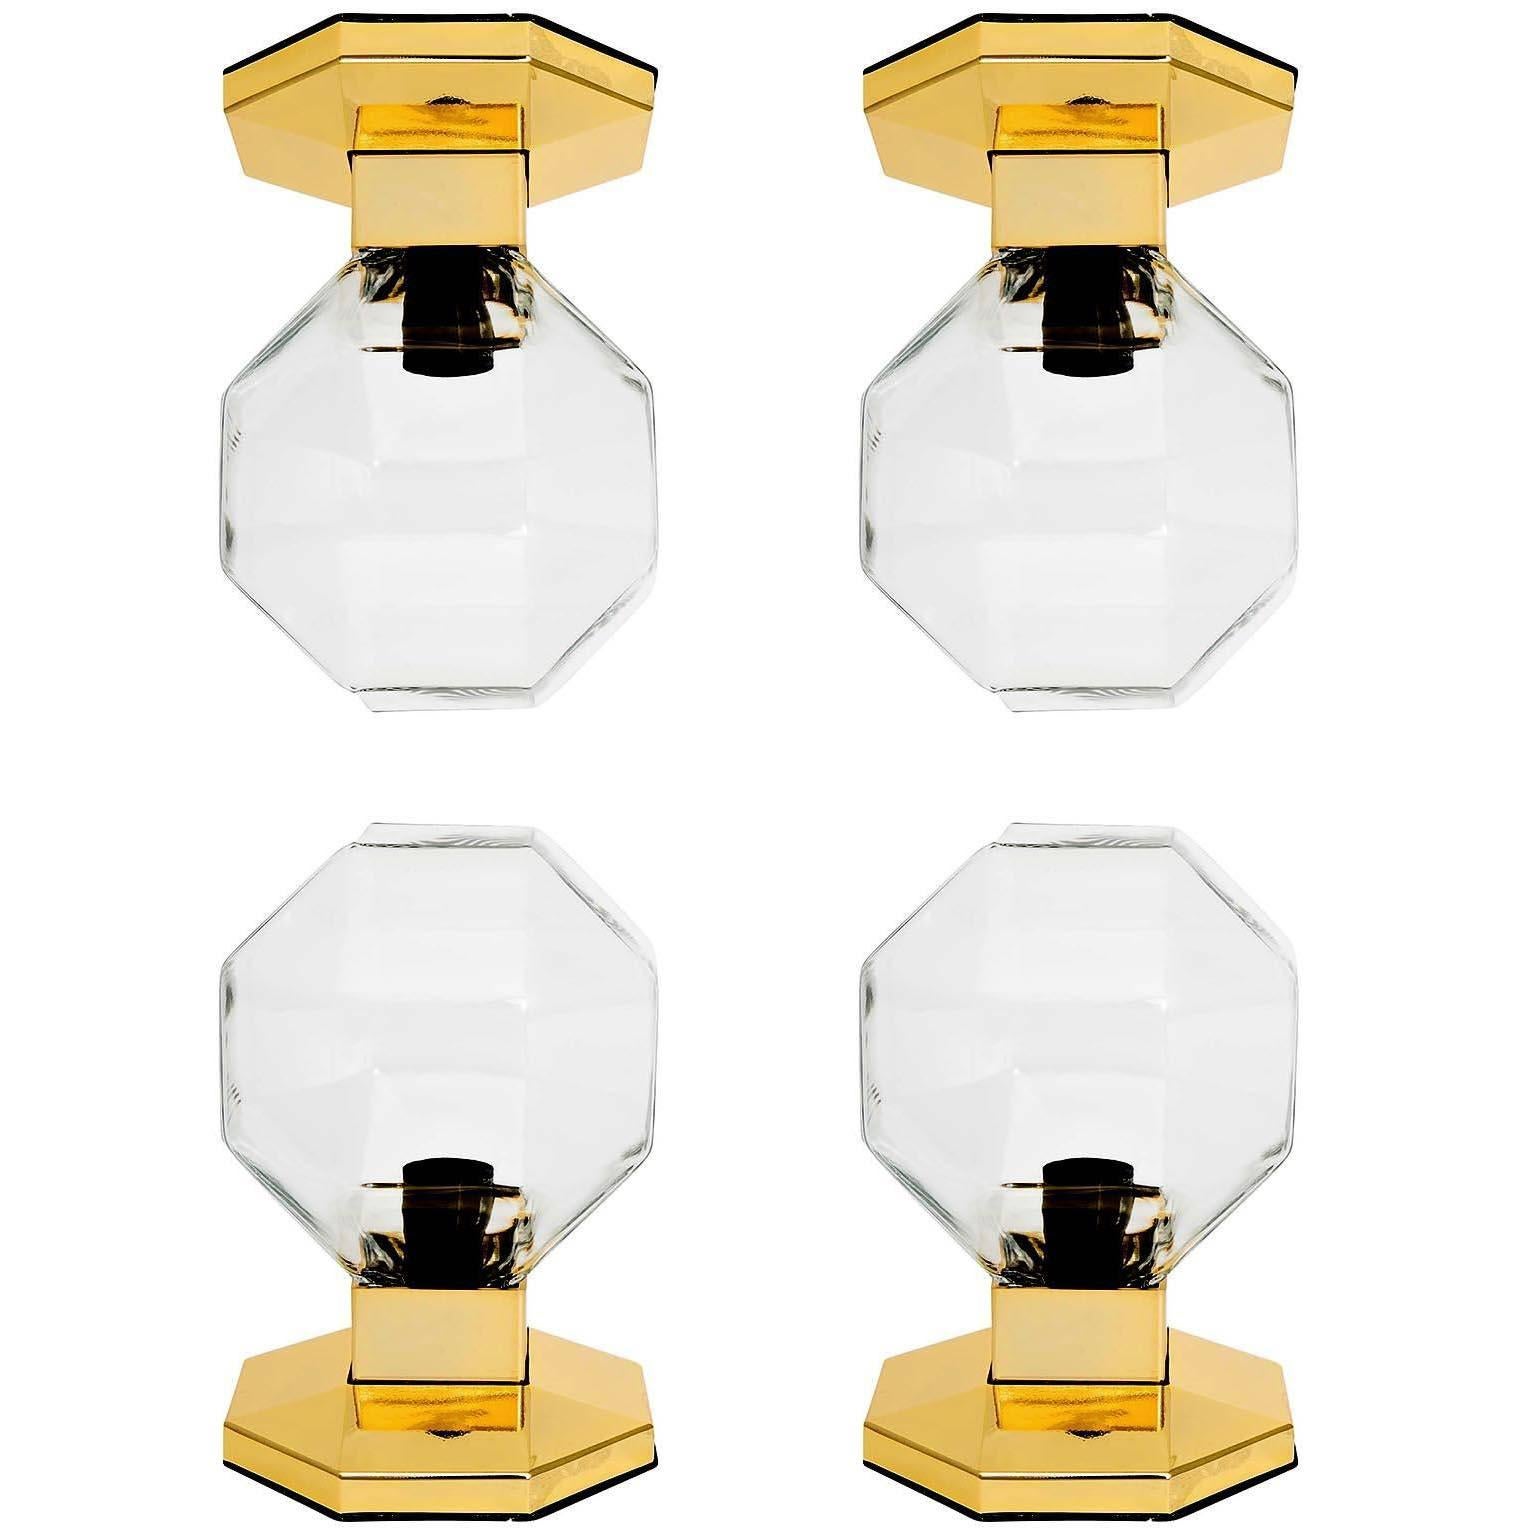 A set of four very nice table, wall, or ceiling lamps designed by Motoko Ishii for Staff Leuchten, Germany, manufactured in midcentury, circa 1970.
They are made of brass-plated finish with clear glasses. These lights can be used as sconces, flush